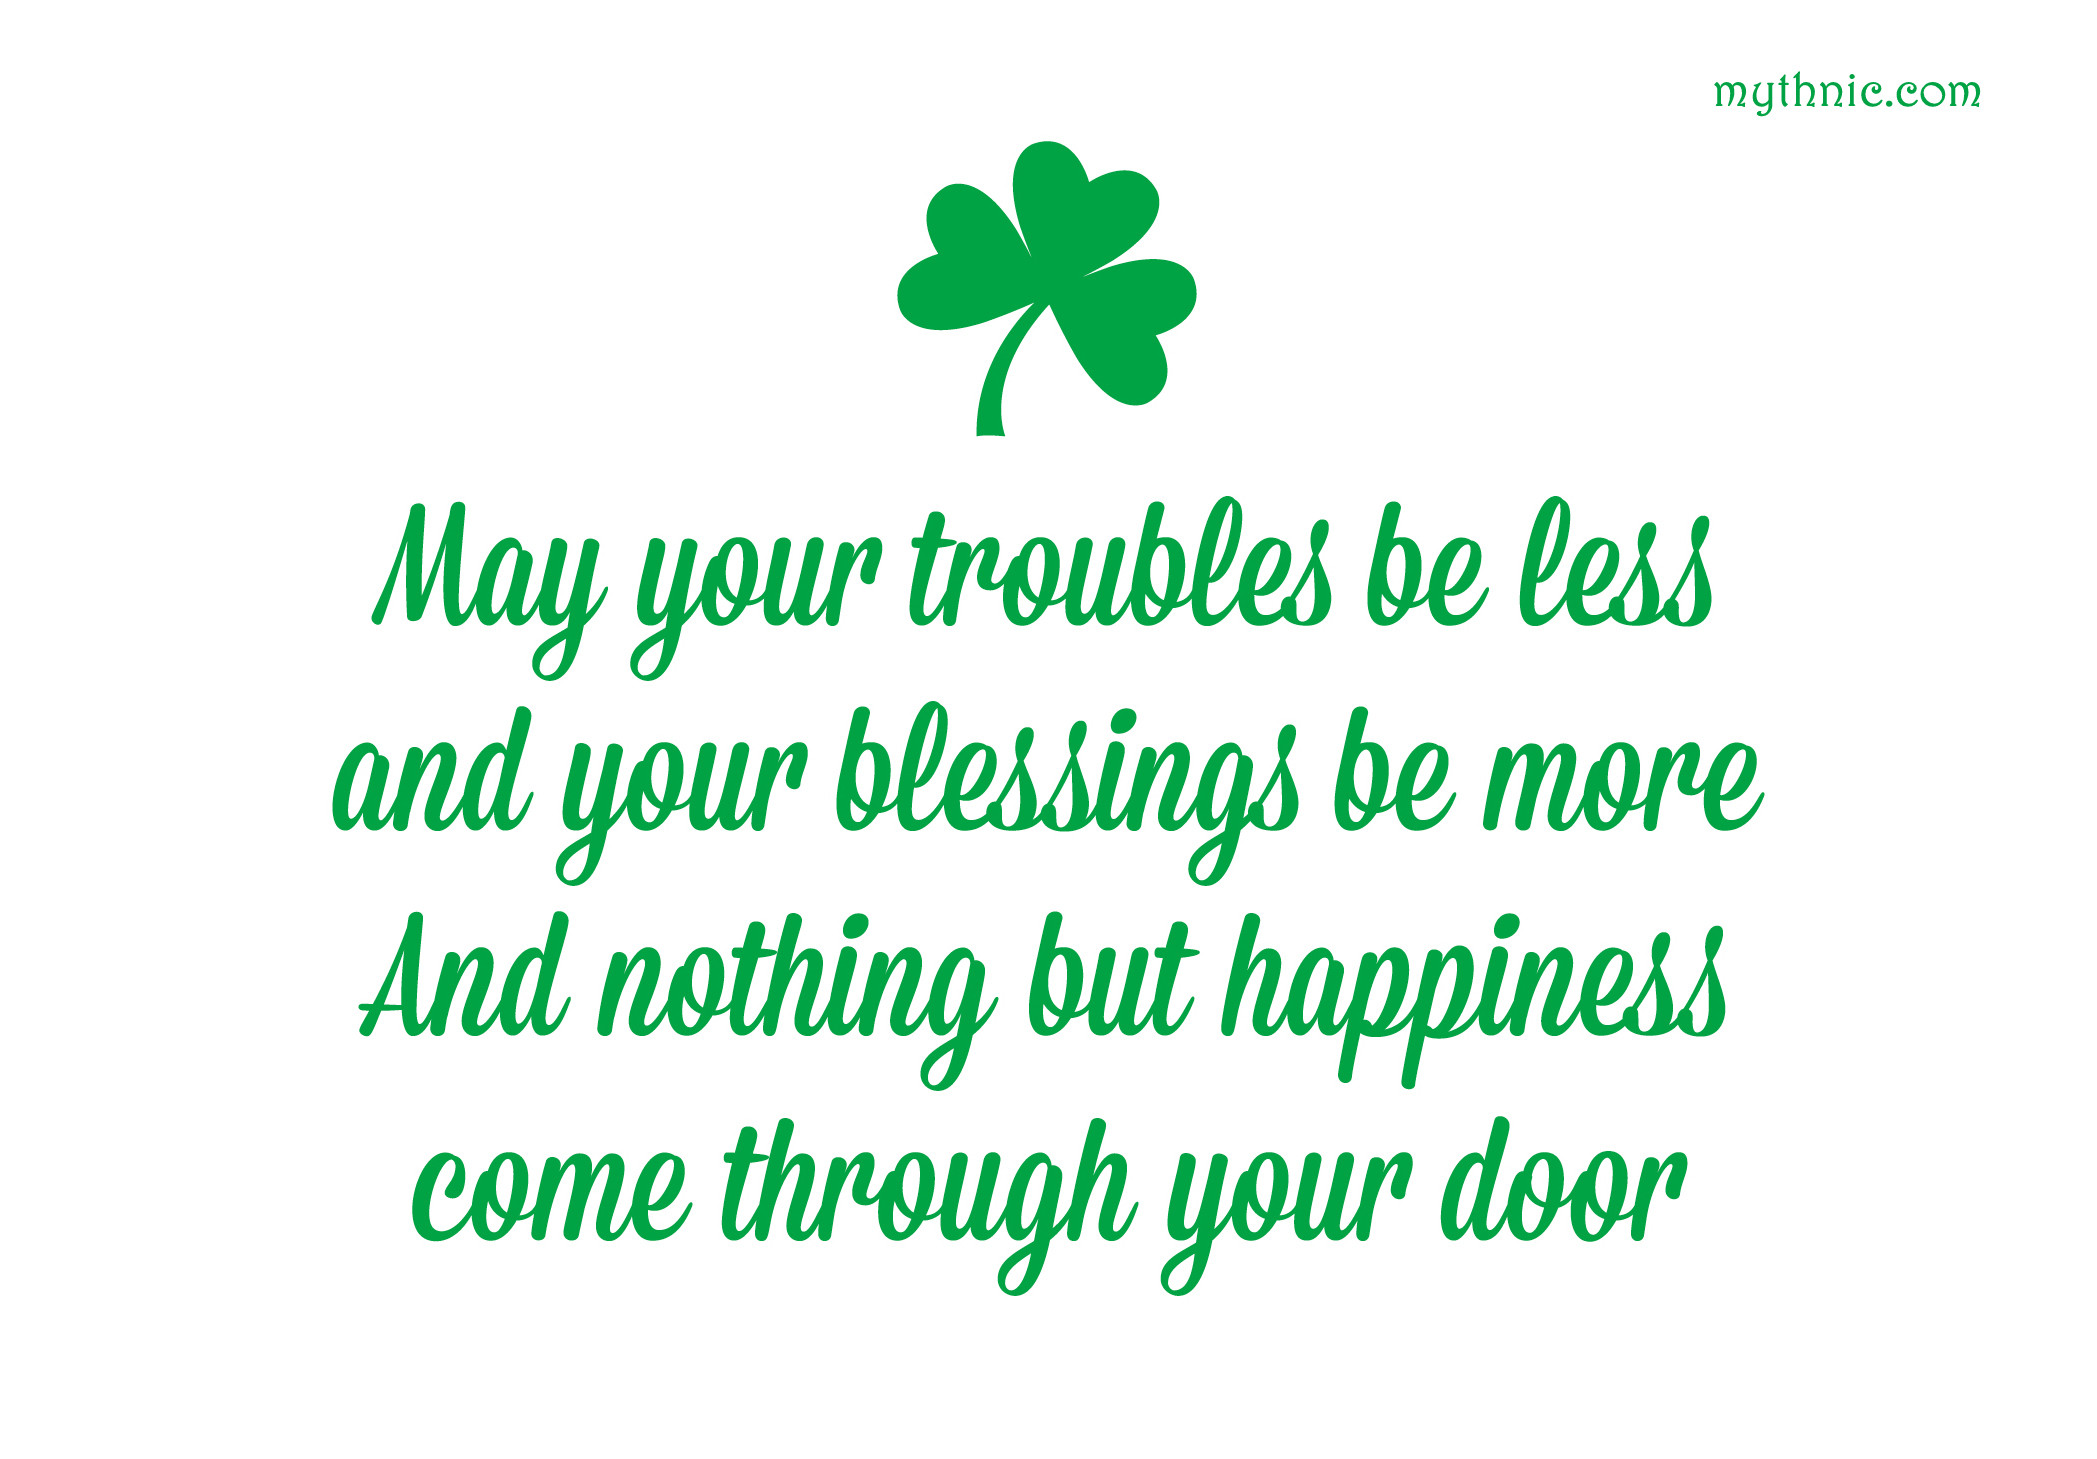 St Patrick's Day Inspirational Quotes
 Happy St Patrick’s Day